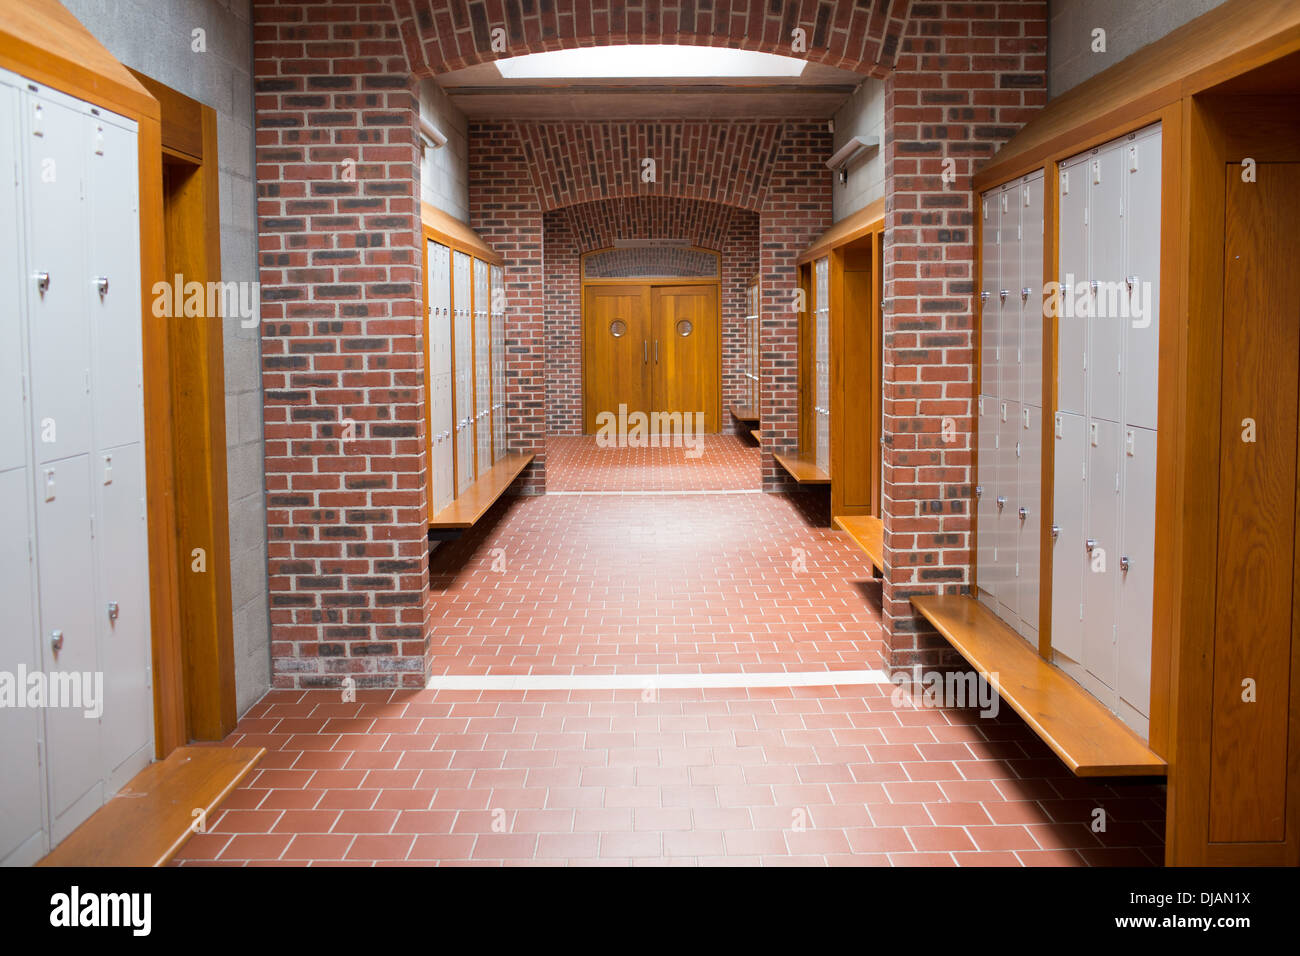 Brick walled corridor with tiled flooring in college Stock Photo